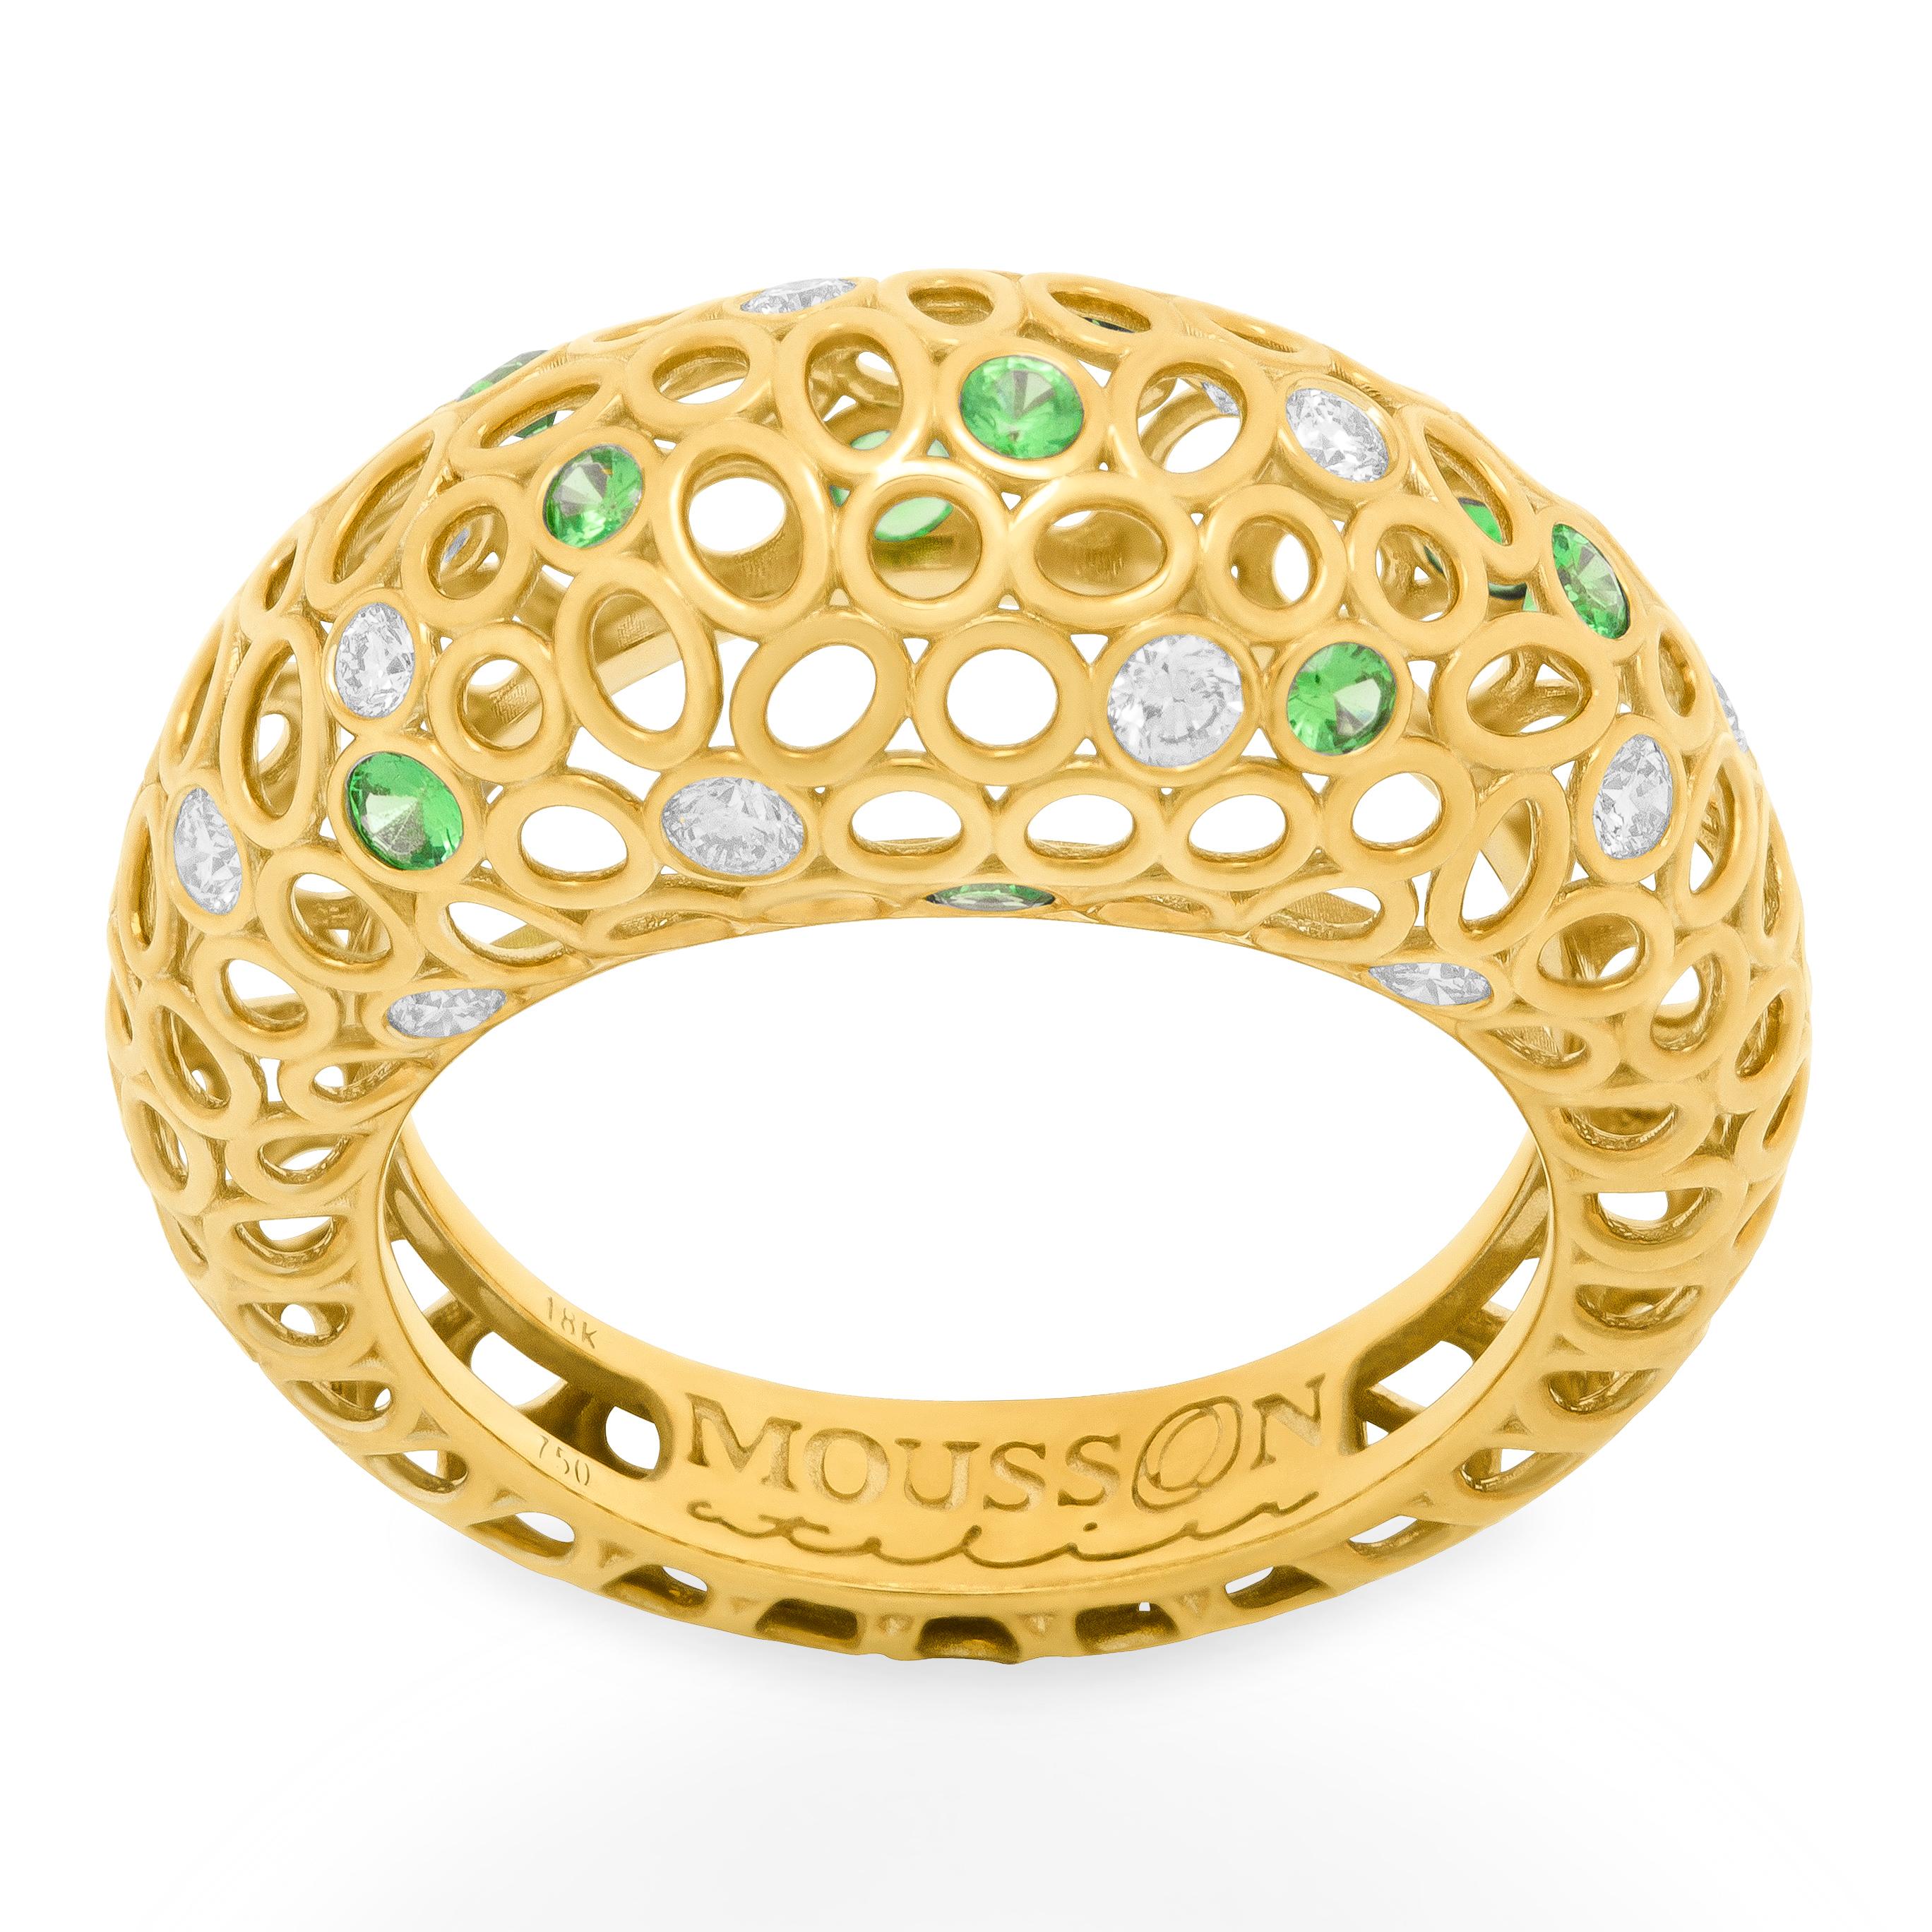 Tsavorites Diamonds 18 Karat Yellow Gold Bubble Ring
Incredibly light and airy Ring from our Bubbles Collection. Yellow 18 Karat Gold is made in the form of variety of small bubbles, some of which have 11 Tsavorites and 13 Diamonds setted. Instant